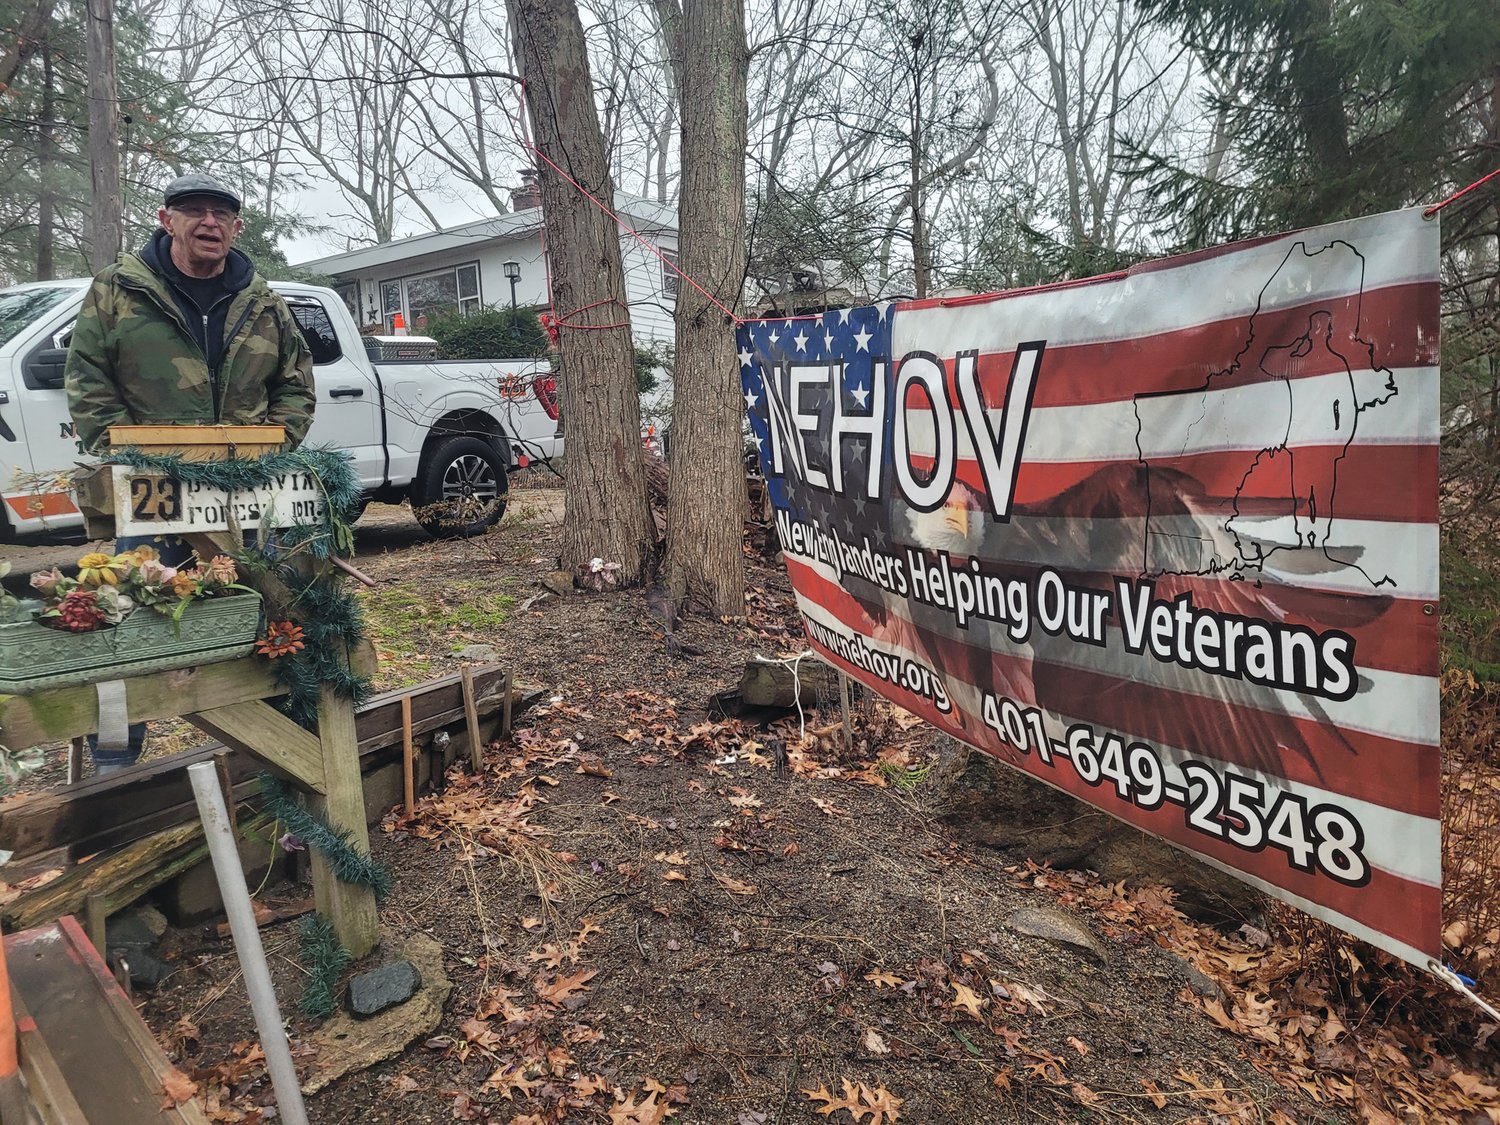 NEHOV HELPS: New Englanders Helping Our Veterans President & Founder Jim Collins and his organization helped Bernard “Bernie” Pavia get back on his feet. The group’s banner hangs outside Pavia’s Forest Drive home.